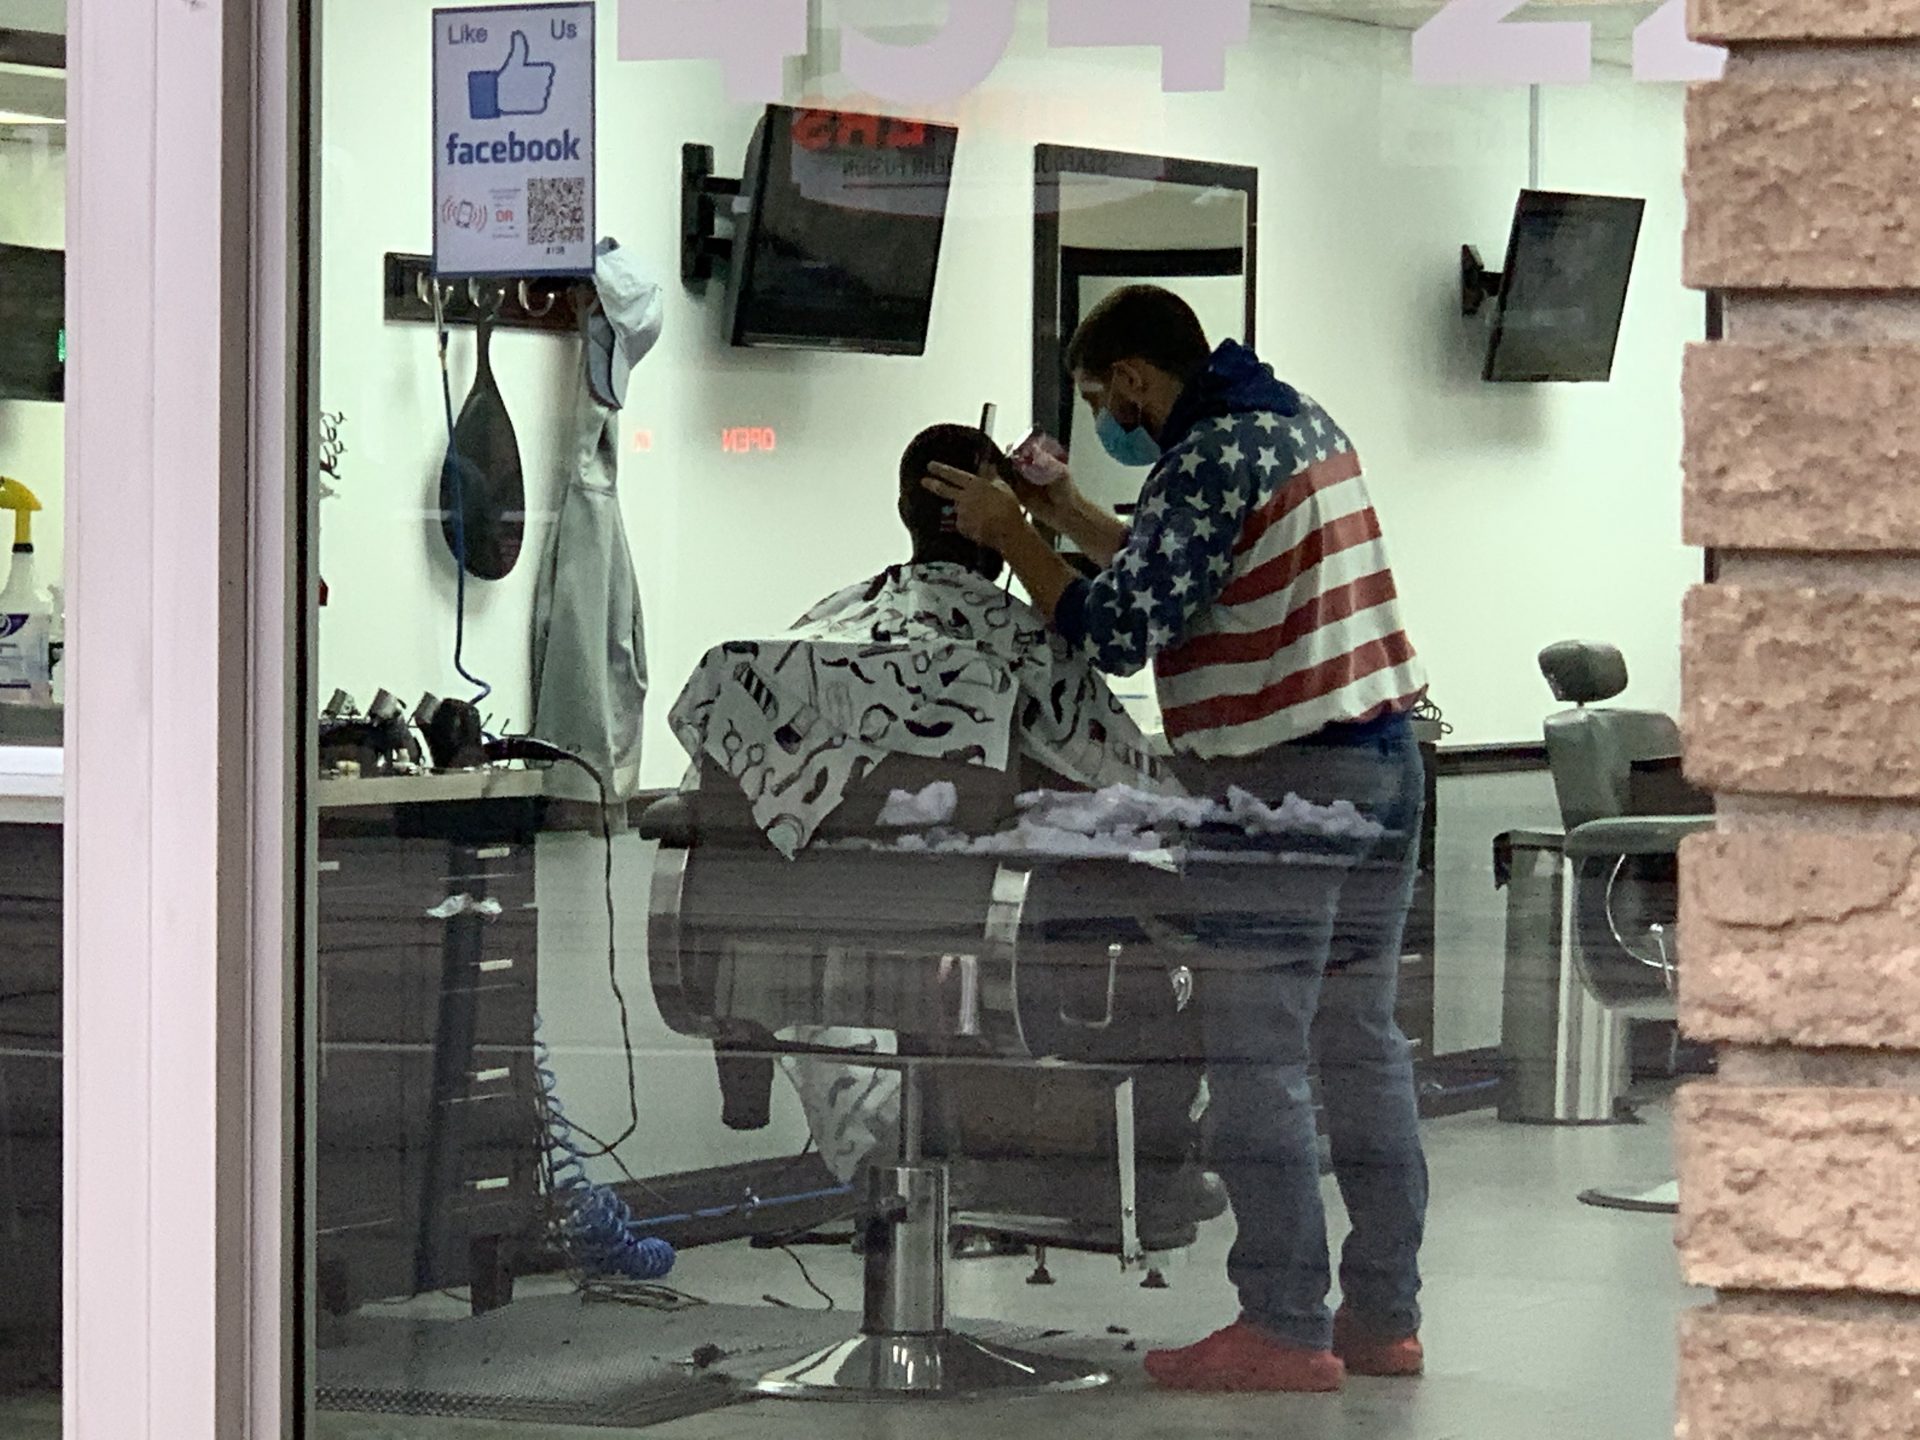 A masked barber gives a customer a trim at Russo's Barber Shop in Erie on Dec. 8, 2020.